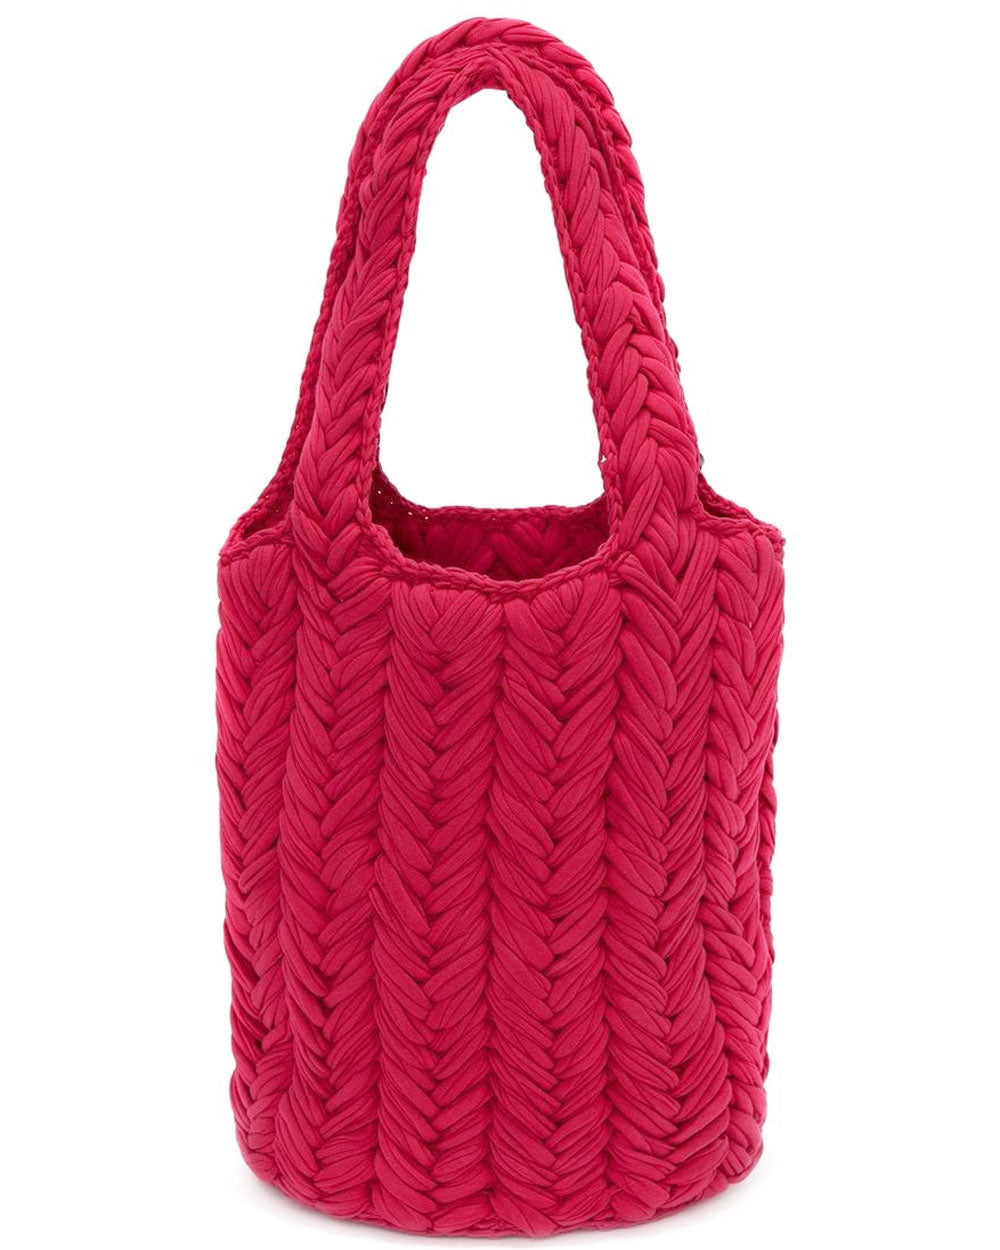 Mirror Knitted Shopper Bag in Hot Pink